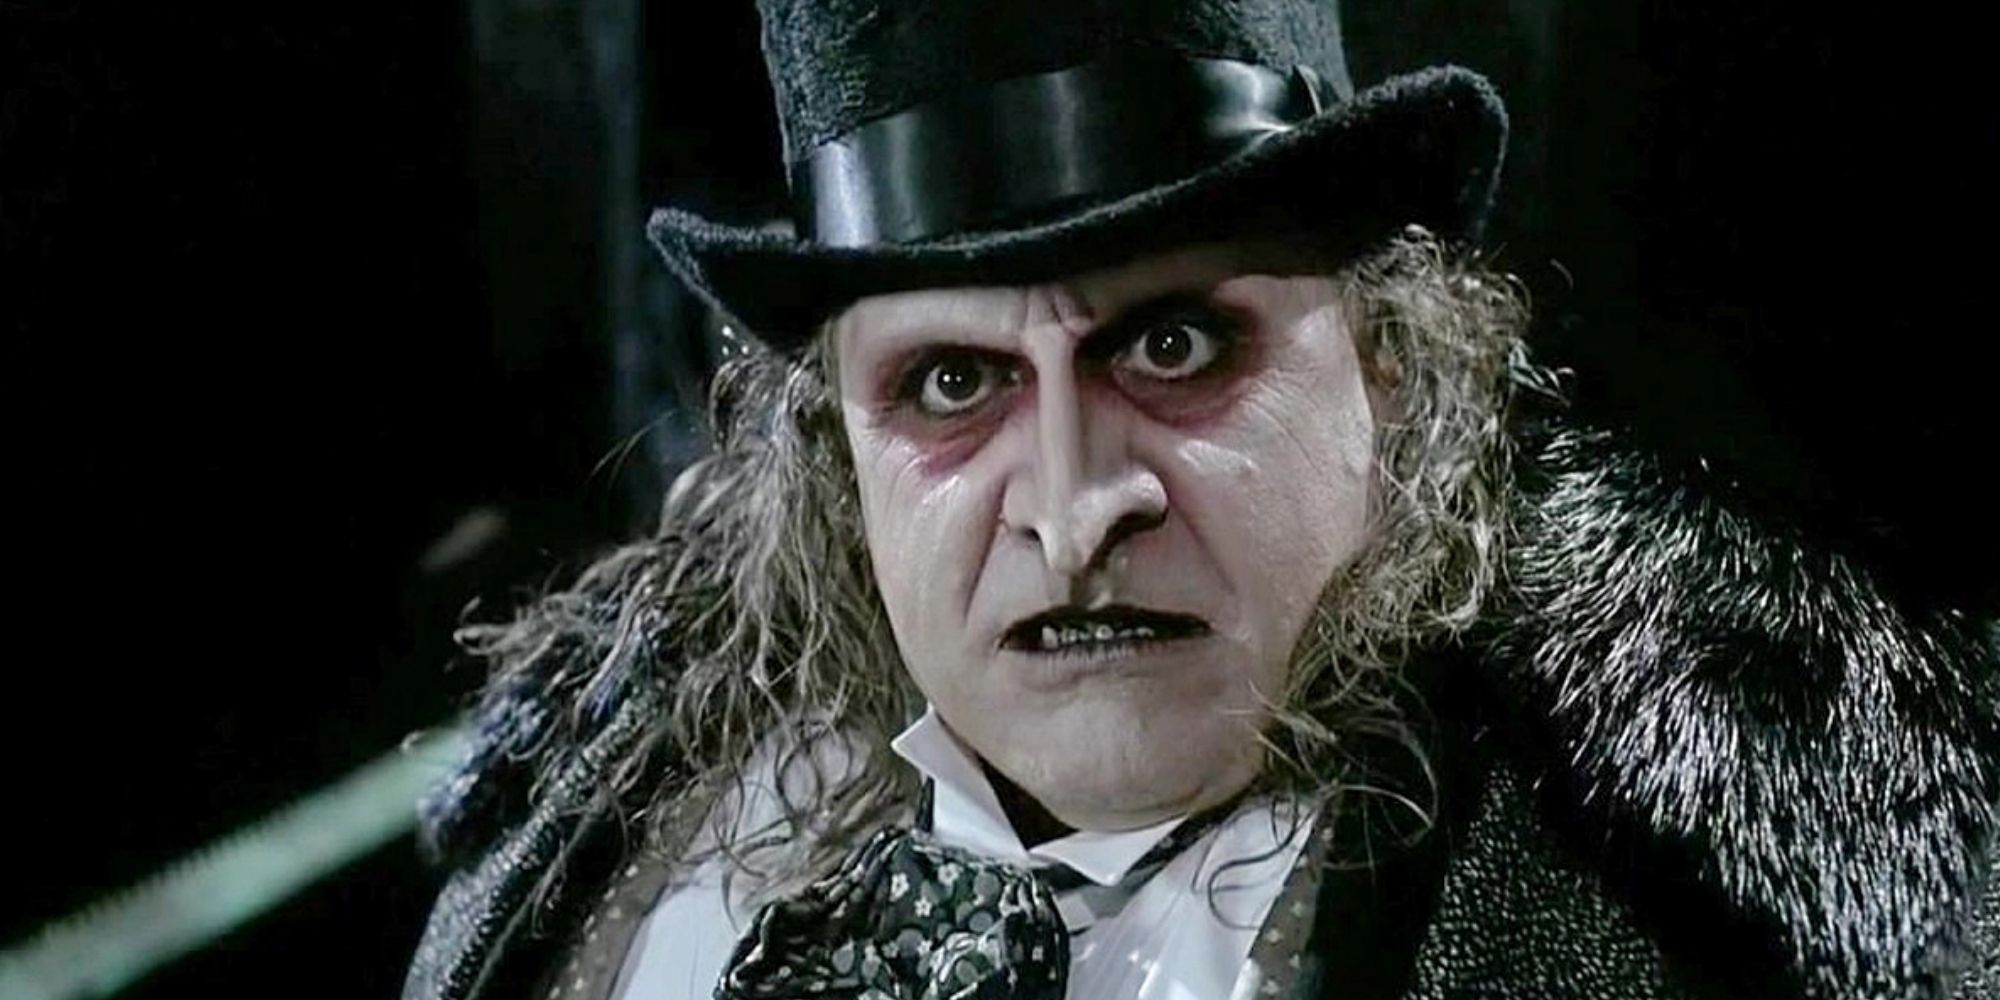 Danny DeVito in 'Batman Returns' (1992) in his Penguin costume, complete with makeup and prosthetics